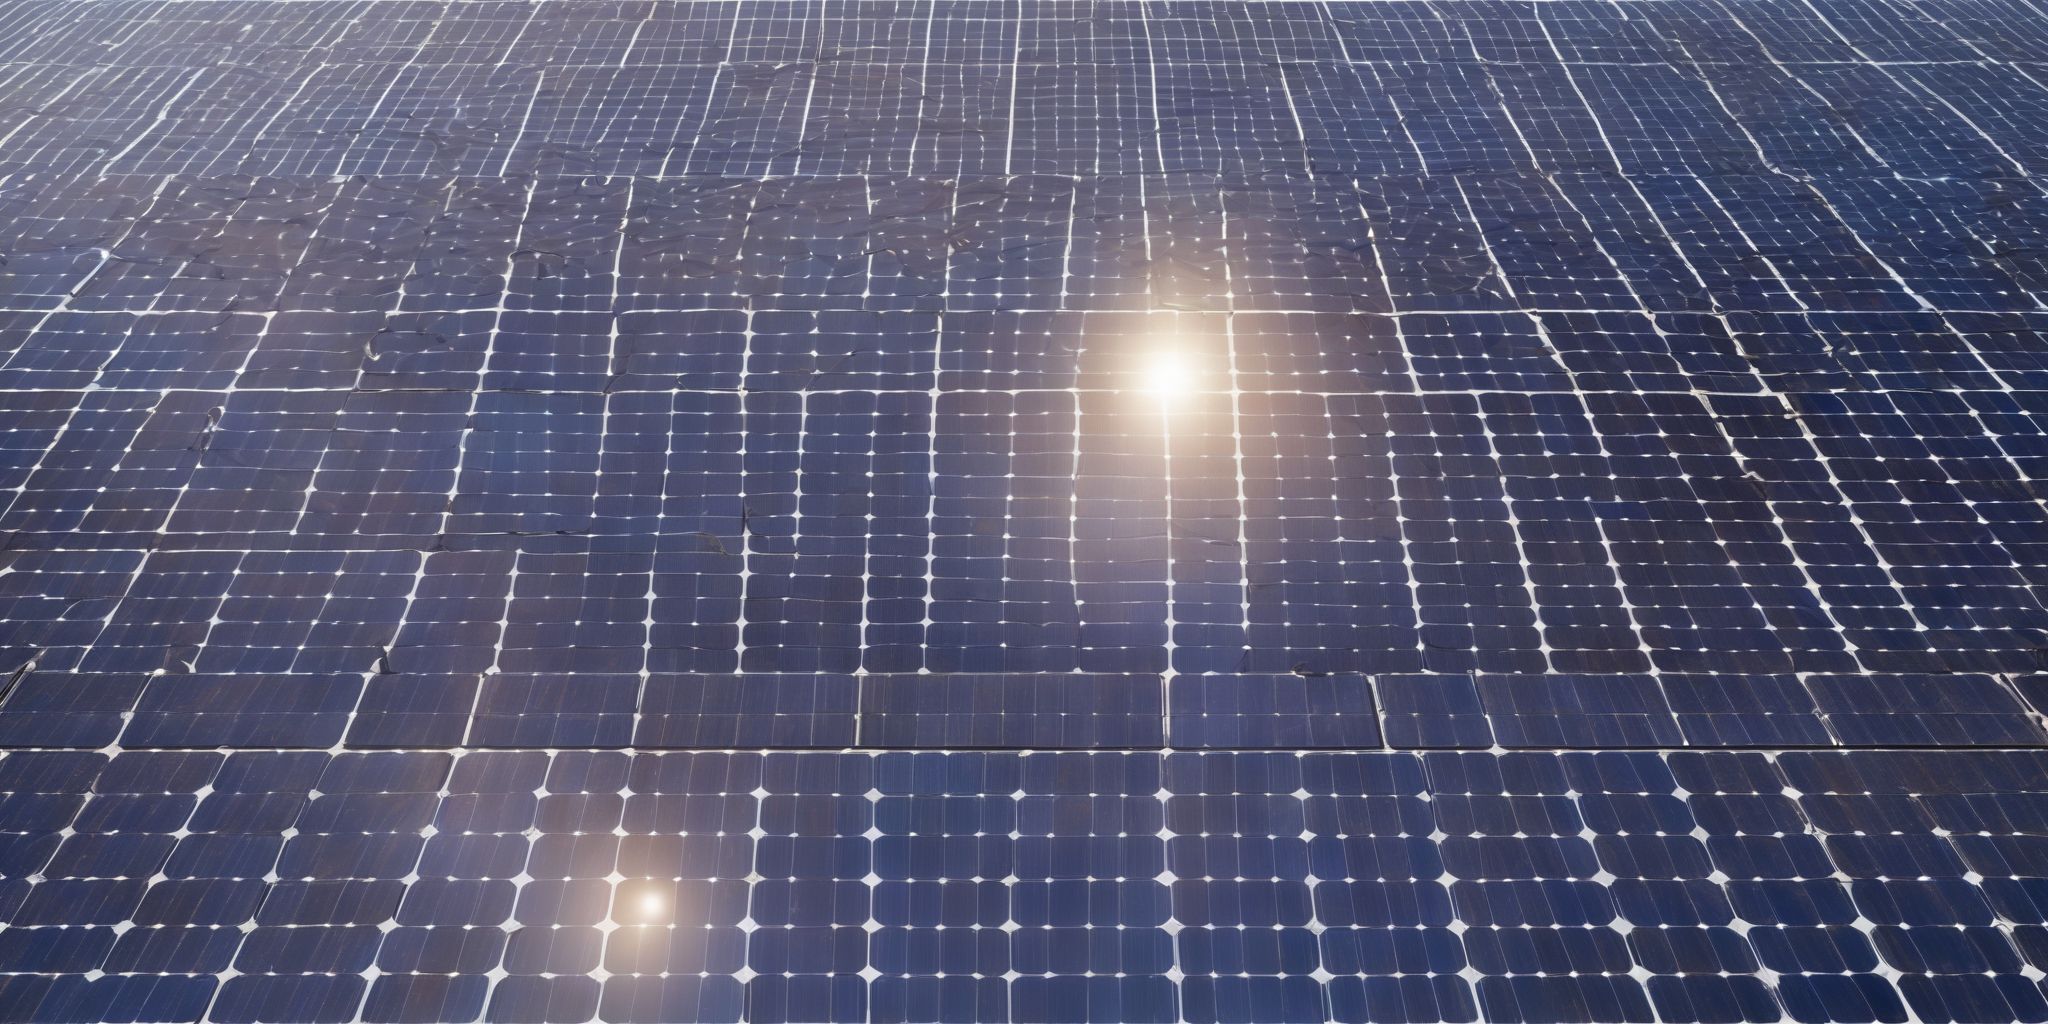 Solar panel  in realistic, photographic style